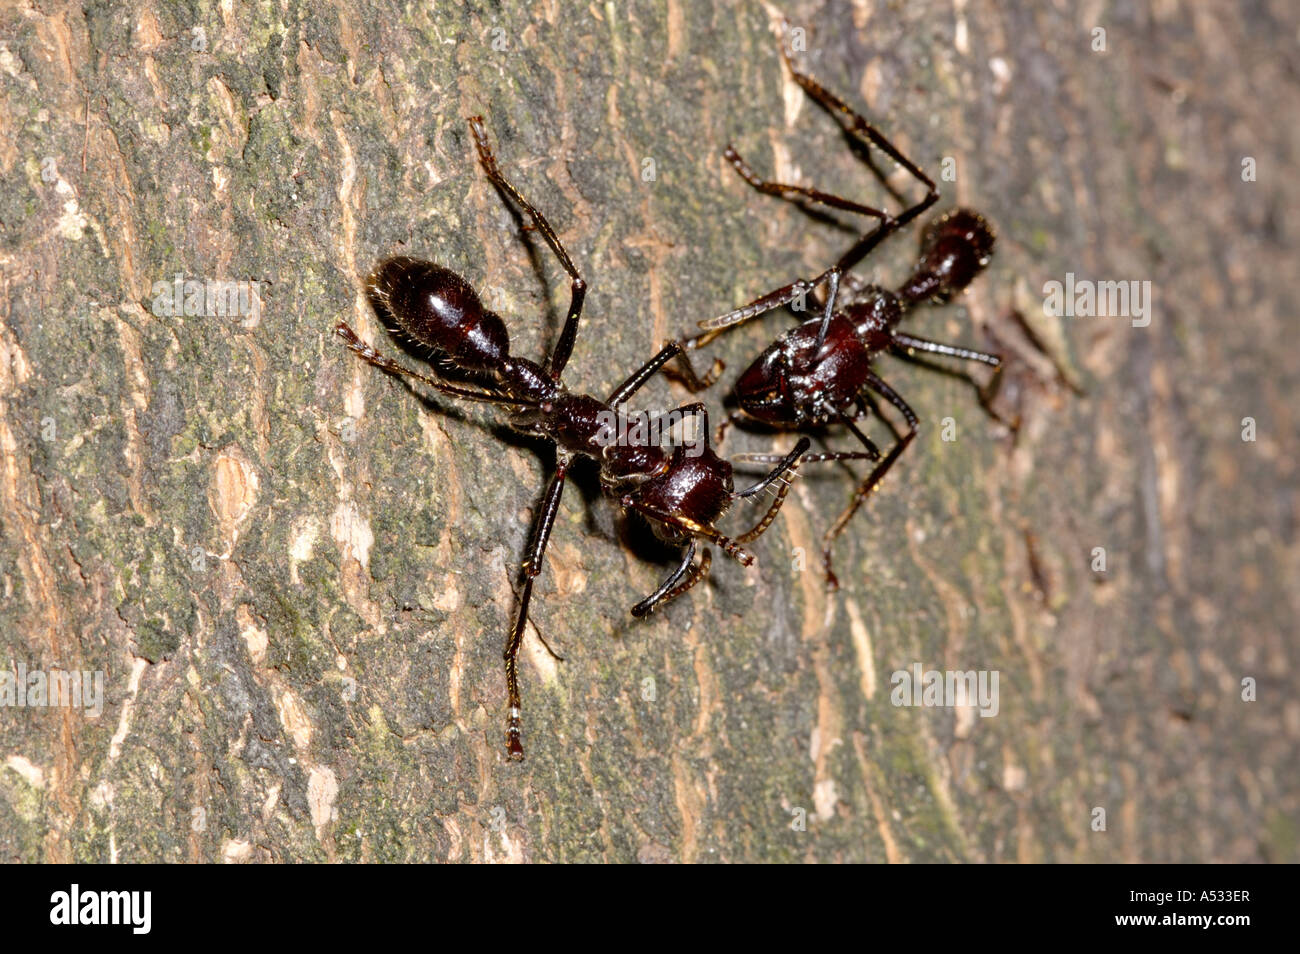 Two 'bullet ants' on a tree trunk, Costa Rica Stock Photo